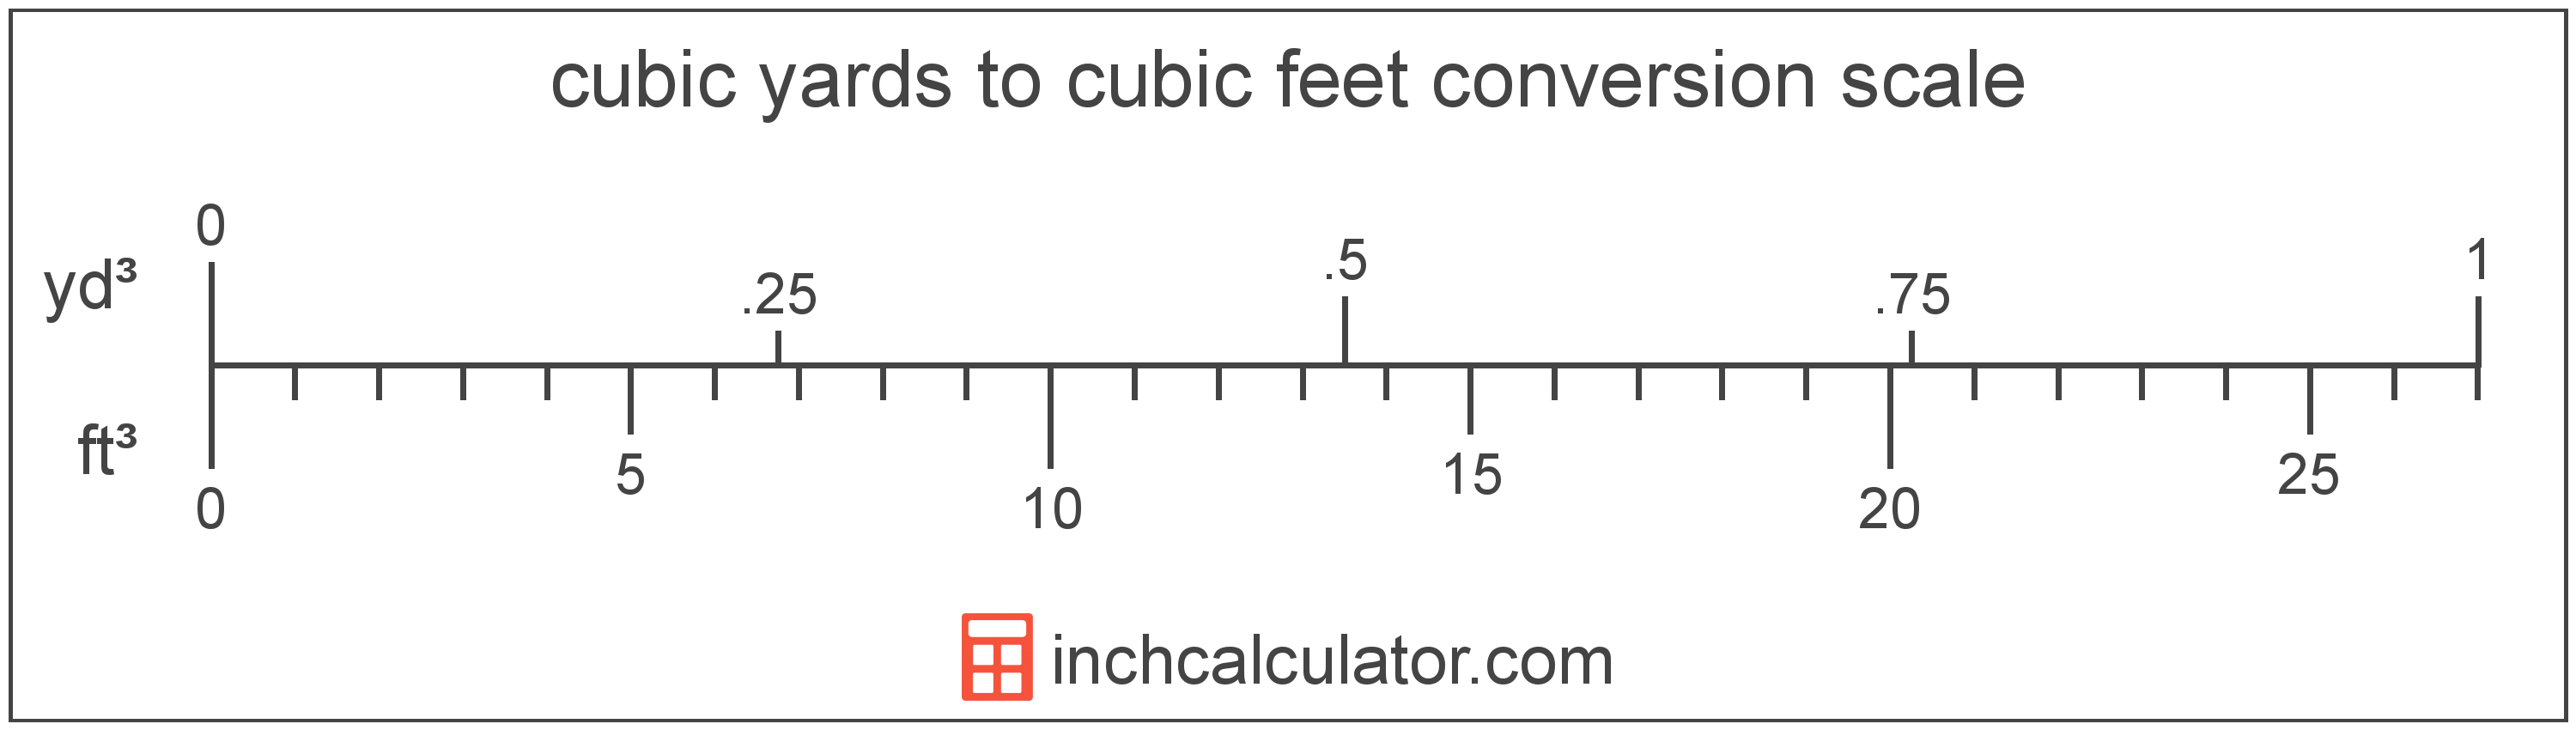 conversion scale showing cubic yards and equivalent cubic feet volume values